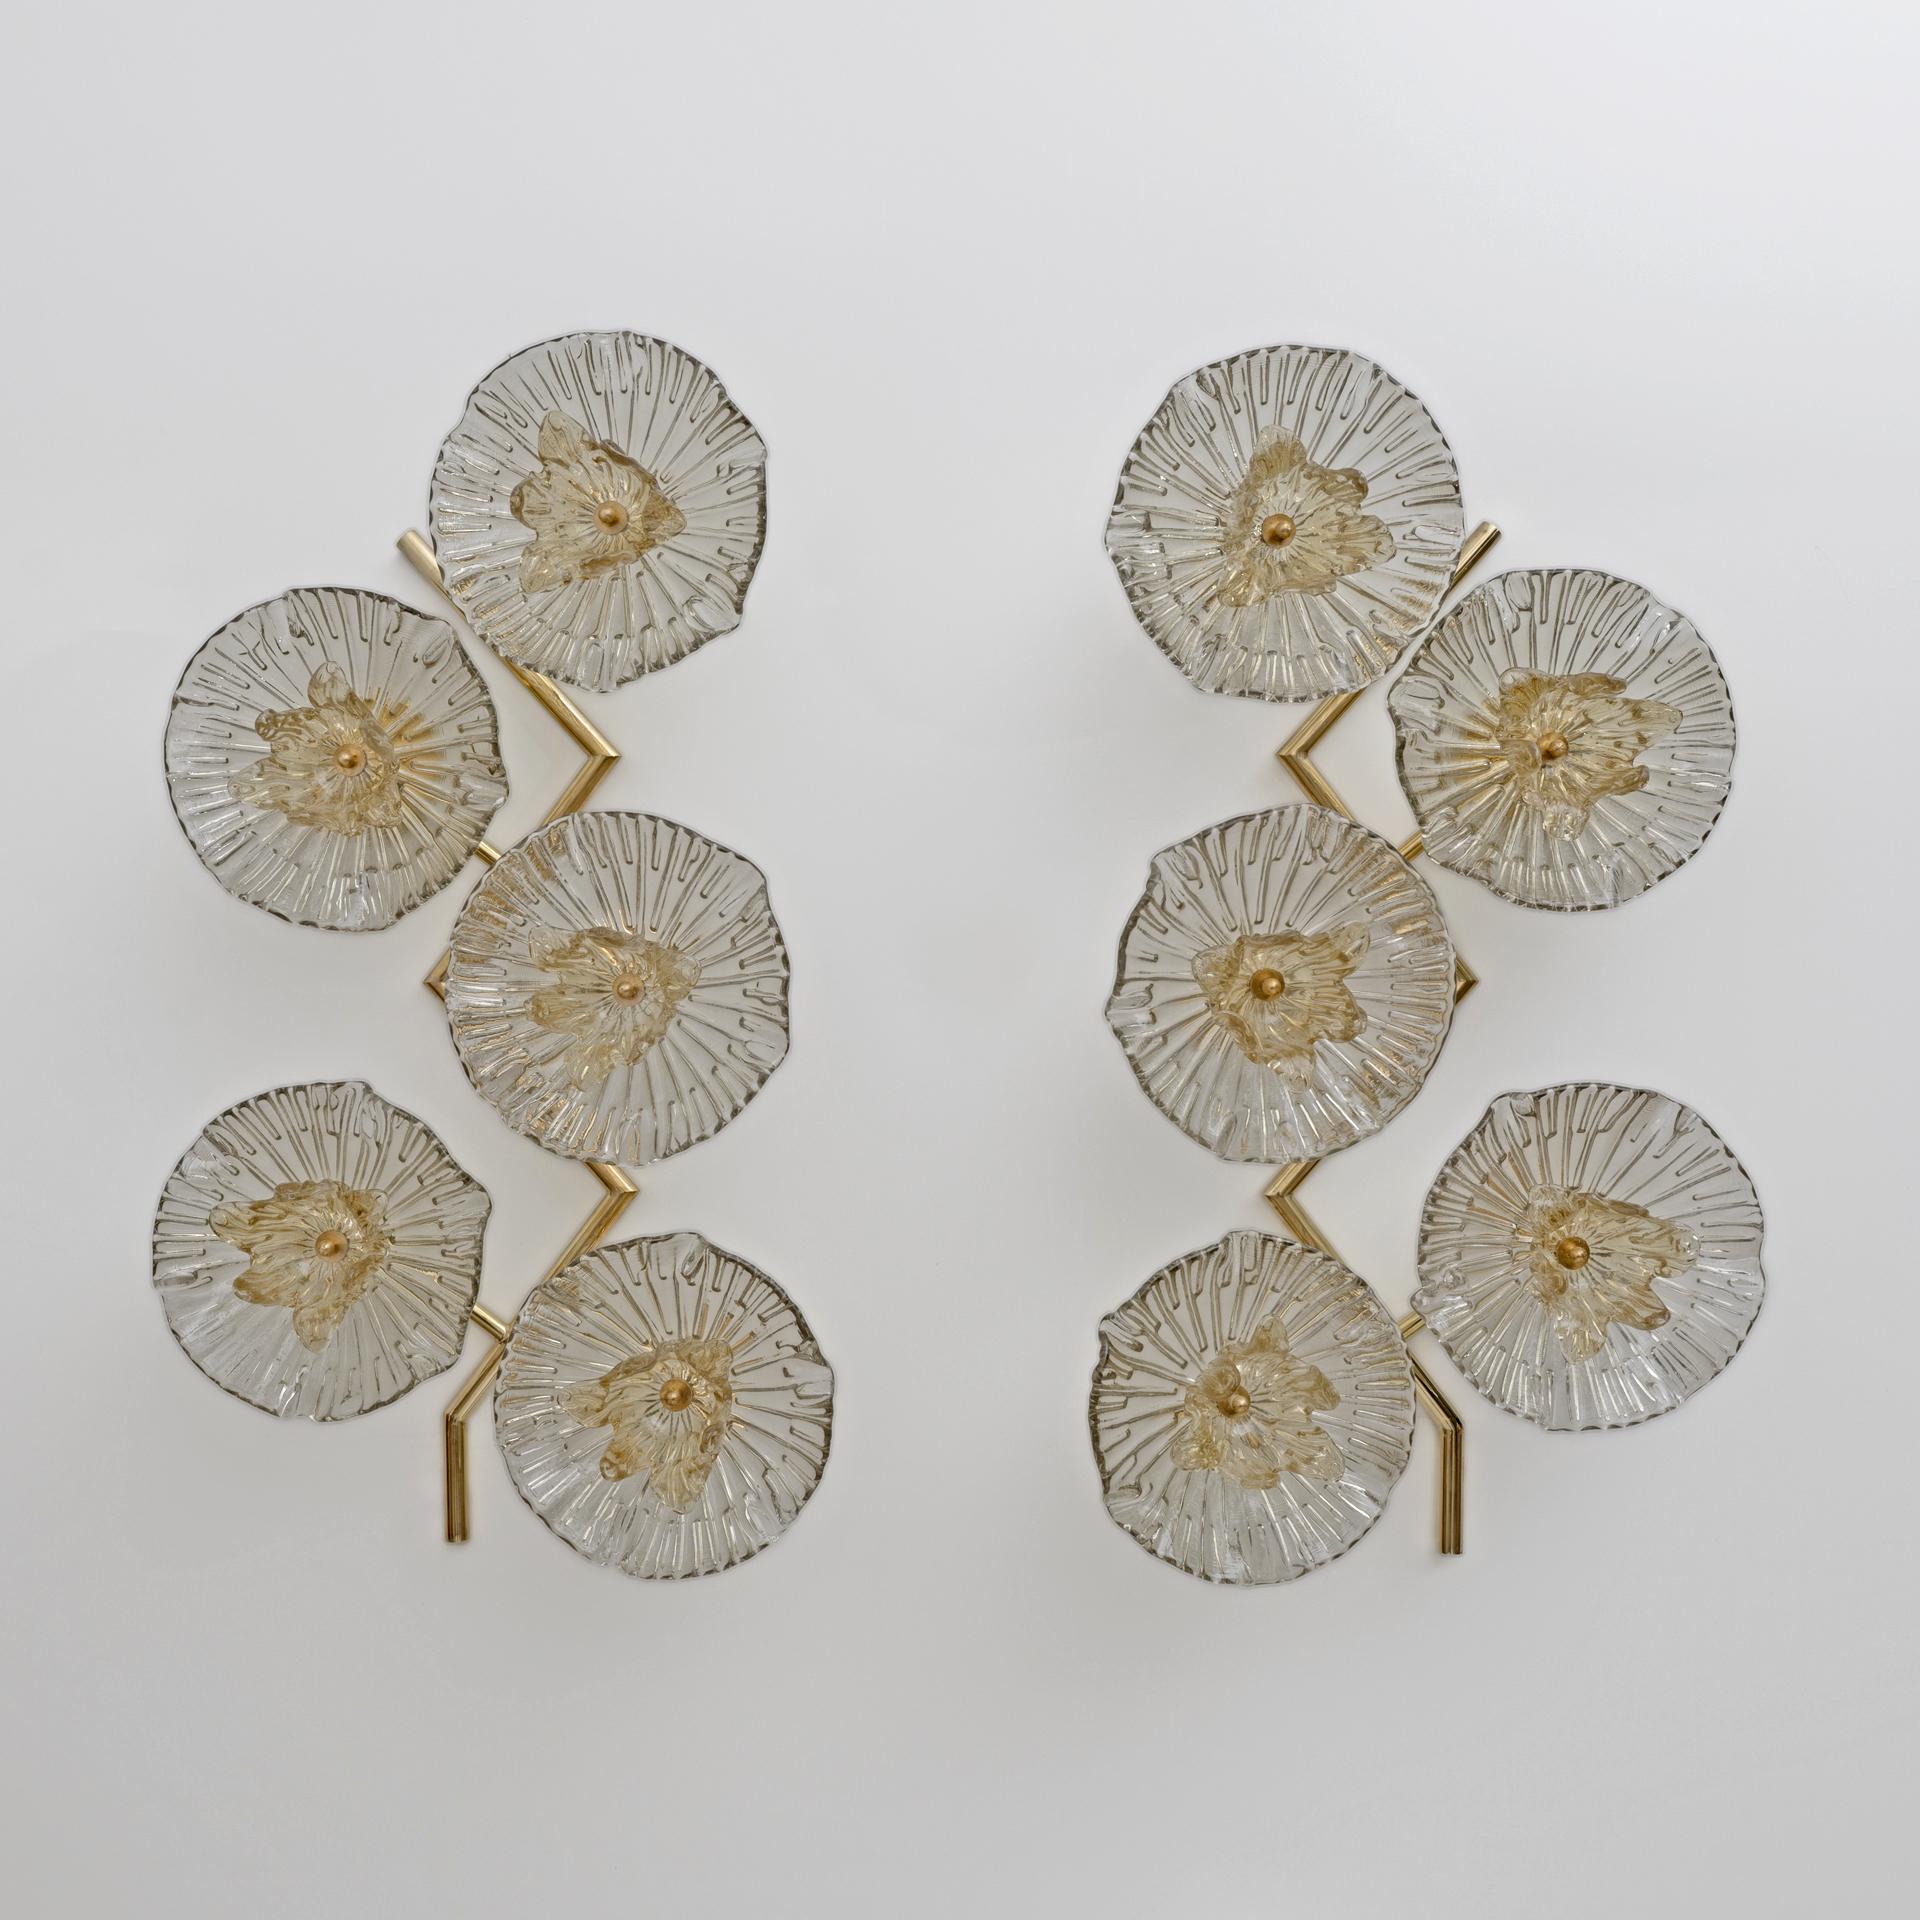 Pair of wall lamps, entirely handmade in Murano, Italy, which bring nature and the energy of Feng Shui into your interiors. This pair of modern and organic wall lights is composed of a hand-crafted brass support in the shape of a branch adorned with